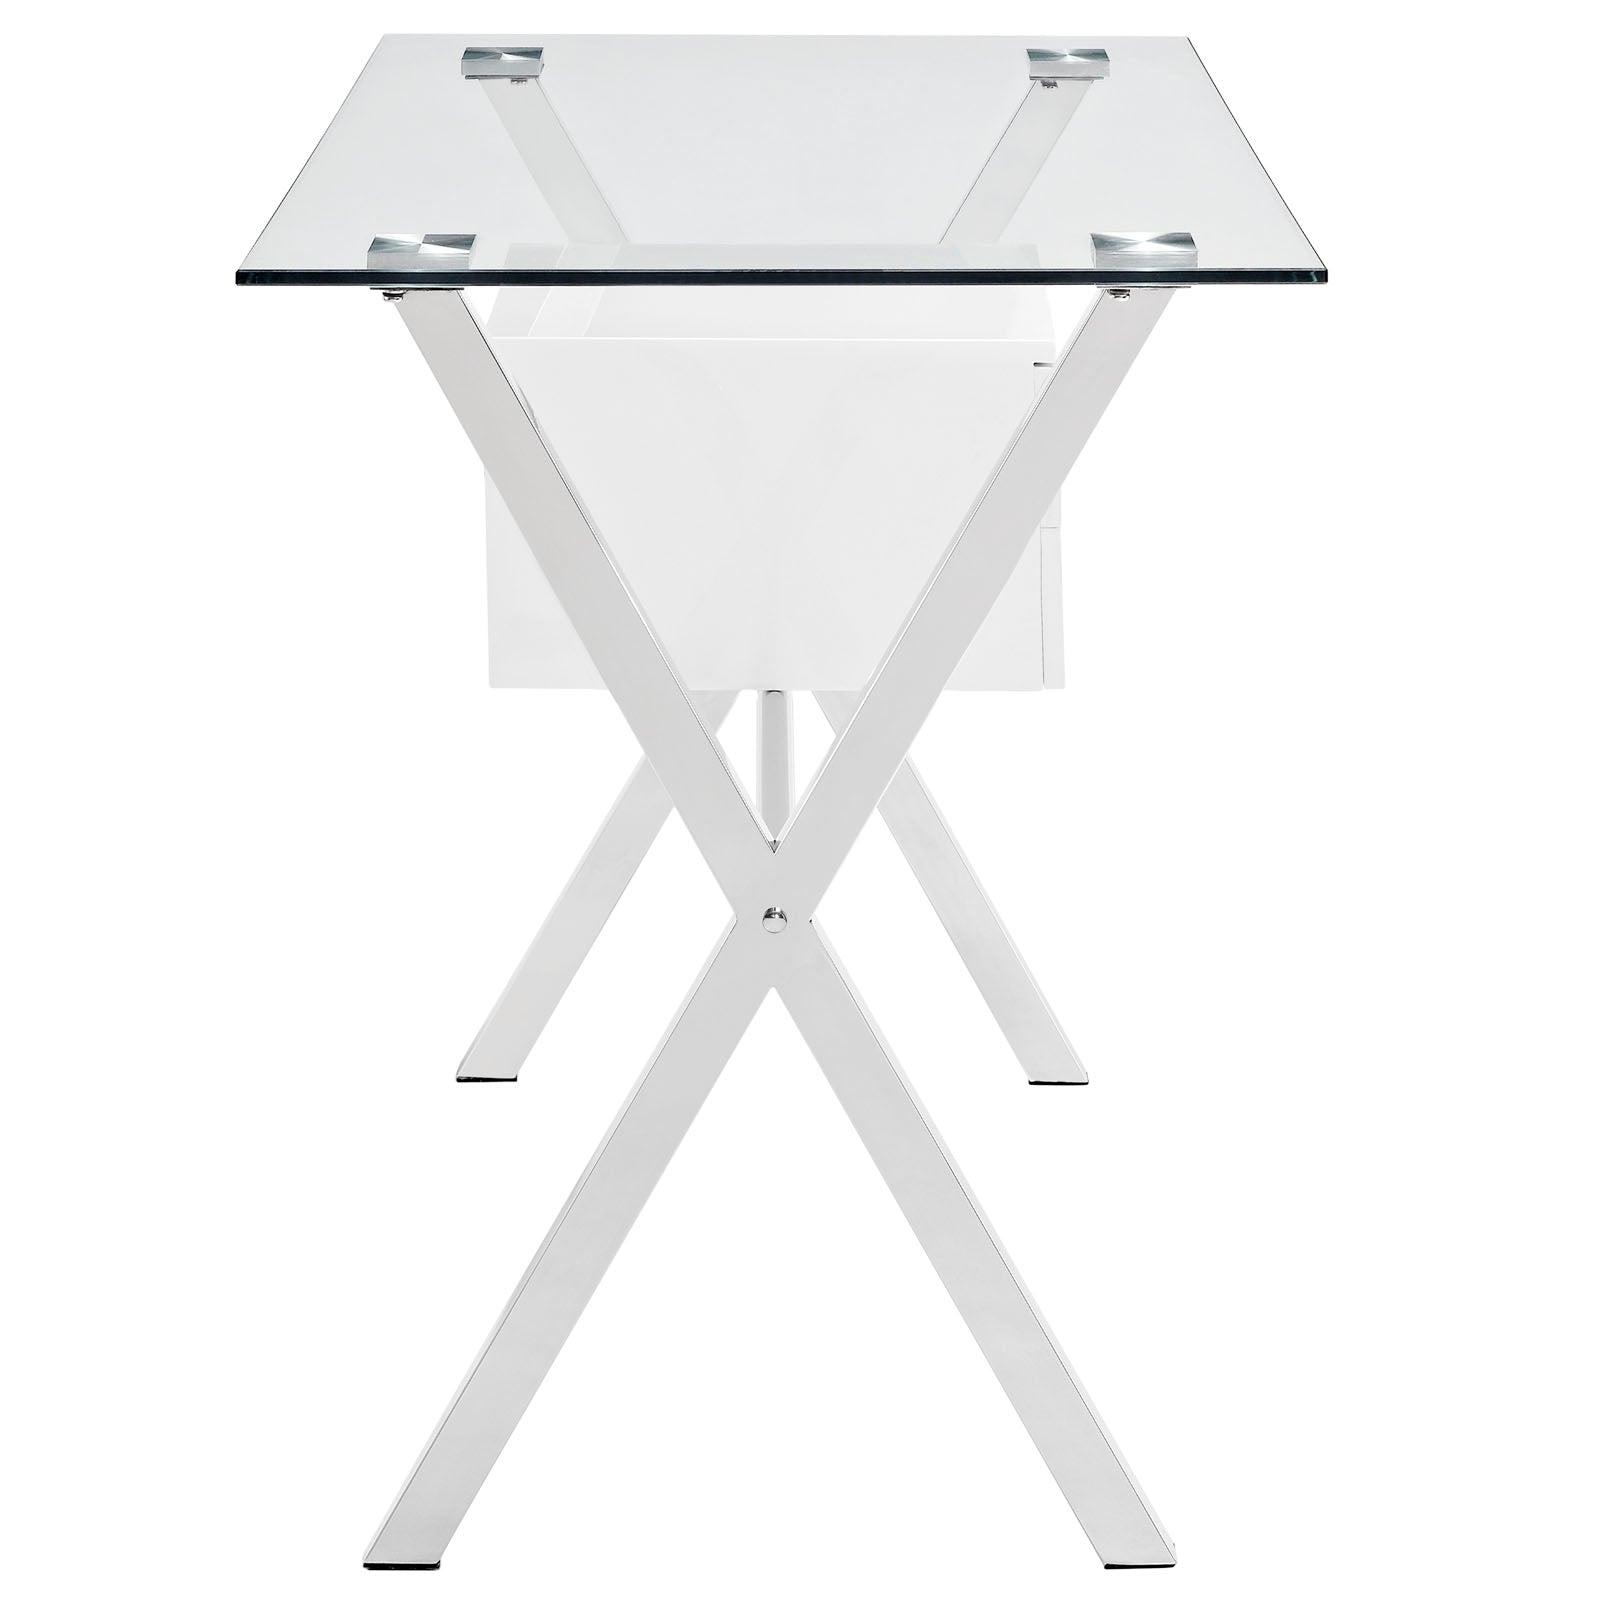 Stasis Glass Top Office Desk-Desk-Modway-Wall2Wall Furnishings